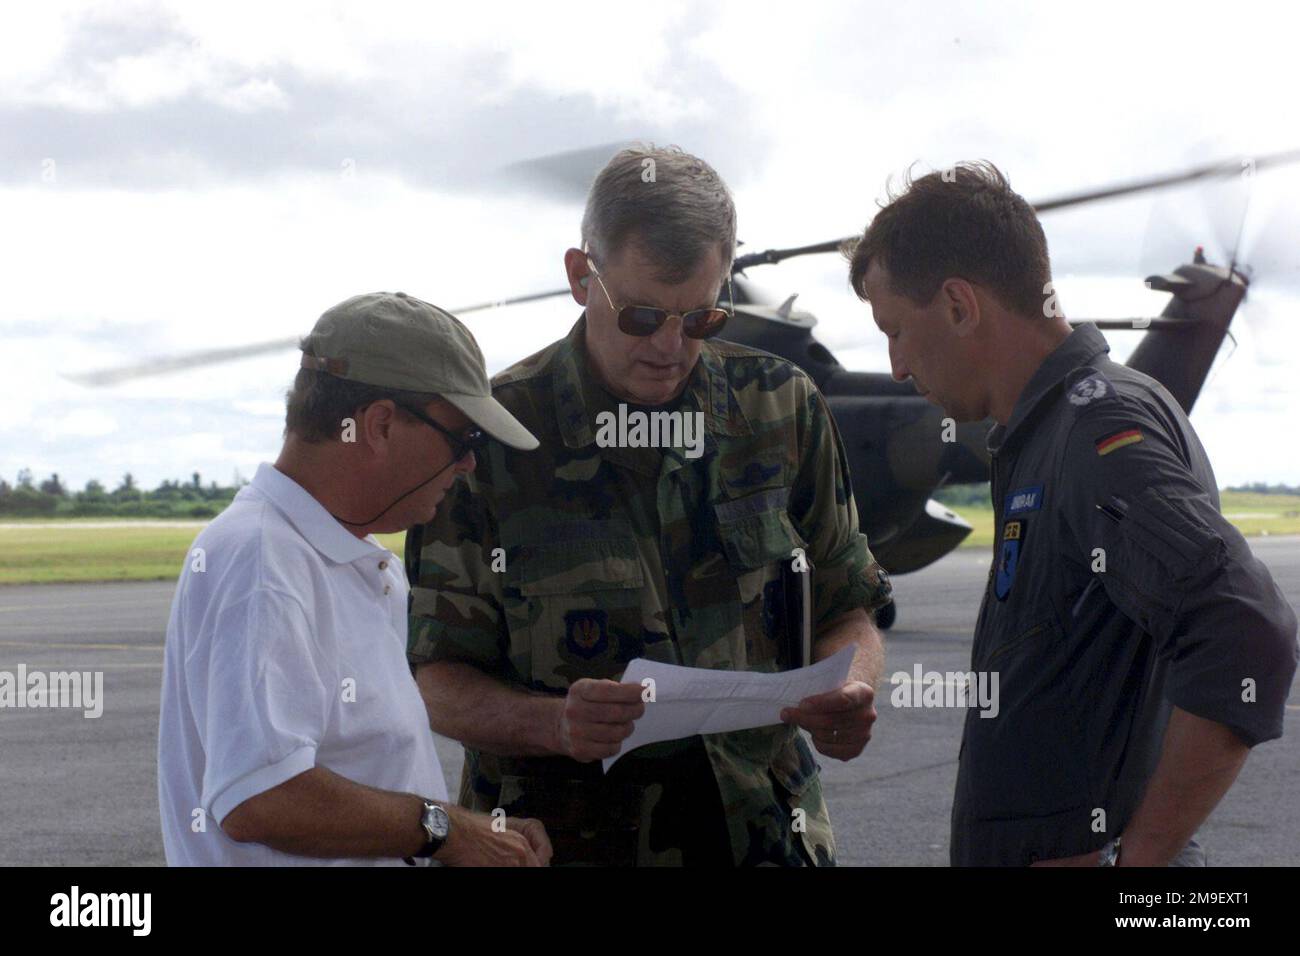 The United States Ambassador to Mozambique, Dean Curran (left) and United States Air Force Major General Joseph H. Wehrle Jr. (center), Commander 3rd Air Force and Commander of Joint Task Force Operation Atlas Response, discuss the delivery of humanitarian relief supplies with German Air Force Colonel Joachim Wundrak (right), the commander of the German contingent. To date, Joint Task Force aircraft participating in Operation Atlas Response have delivered more than 71 tons of humanitarian relief supplies on 102 flights to more than 20 locations. Maputo International Airport, Mozambique, 16 Mar Stock Photo